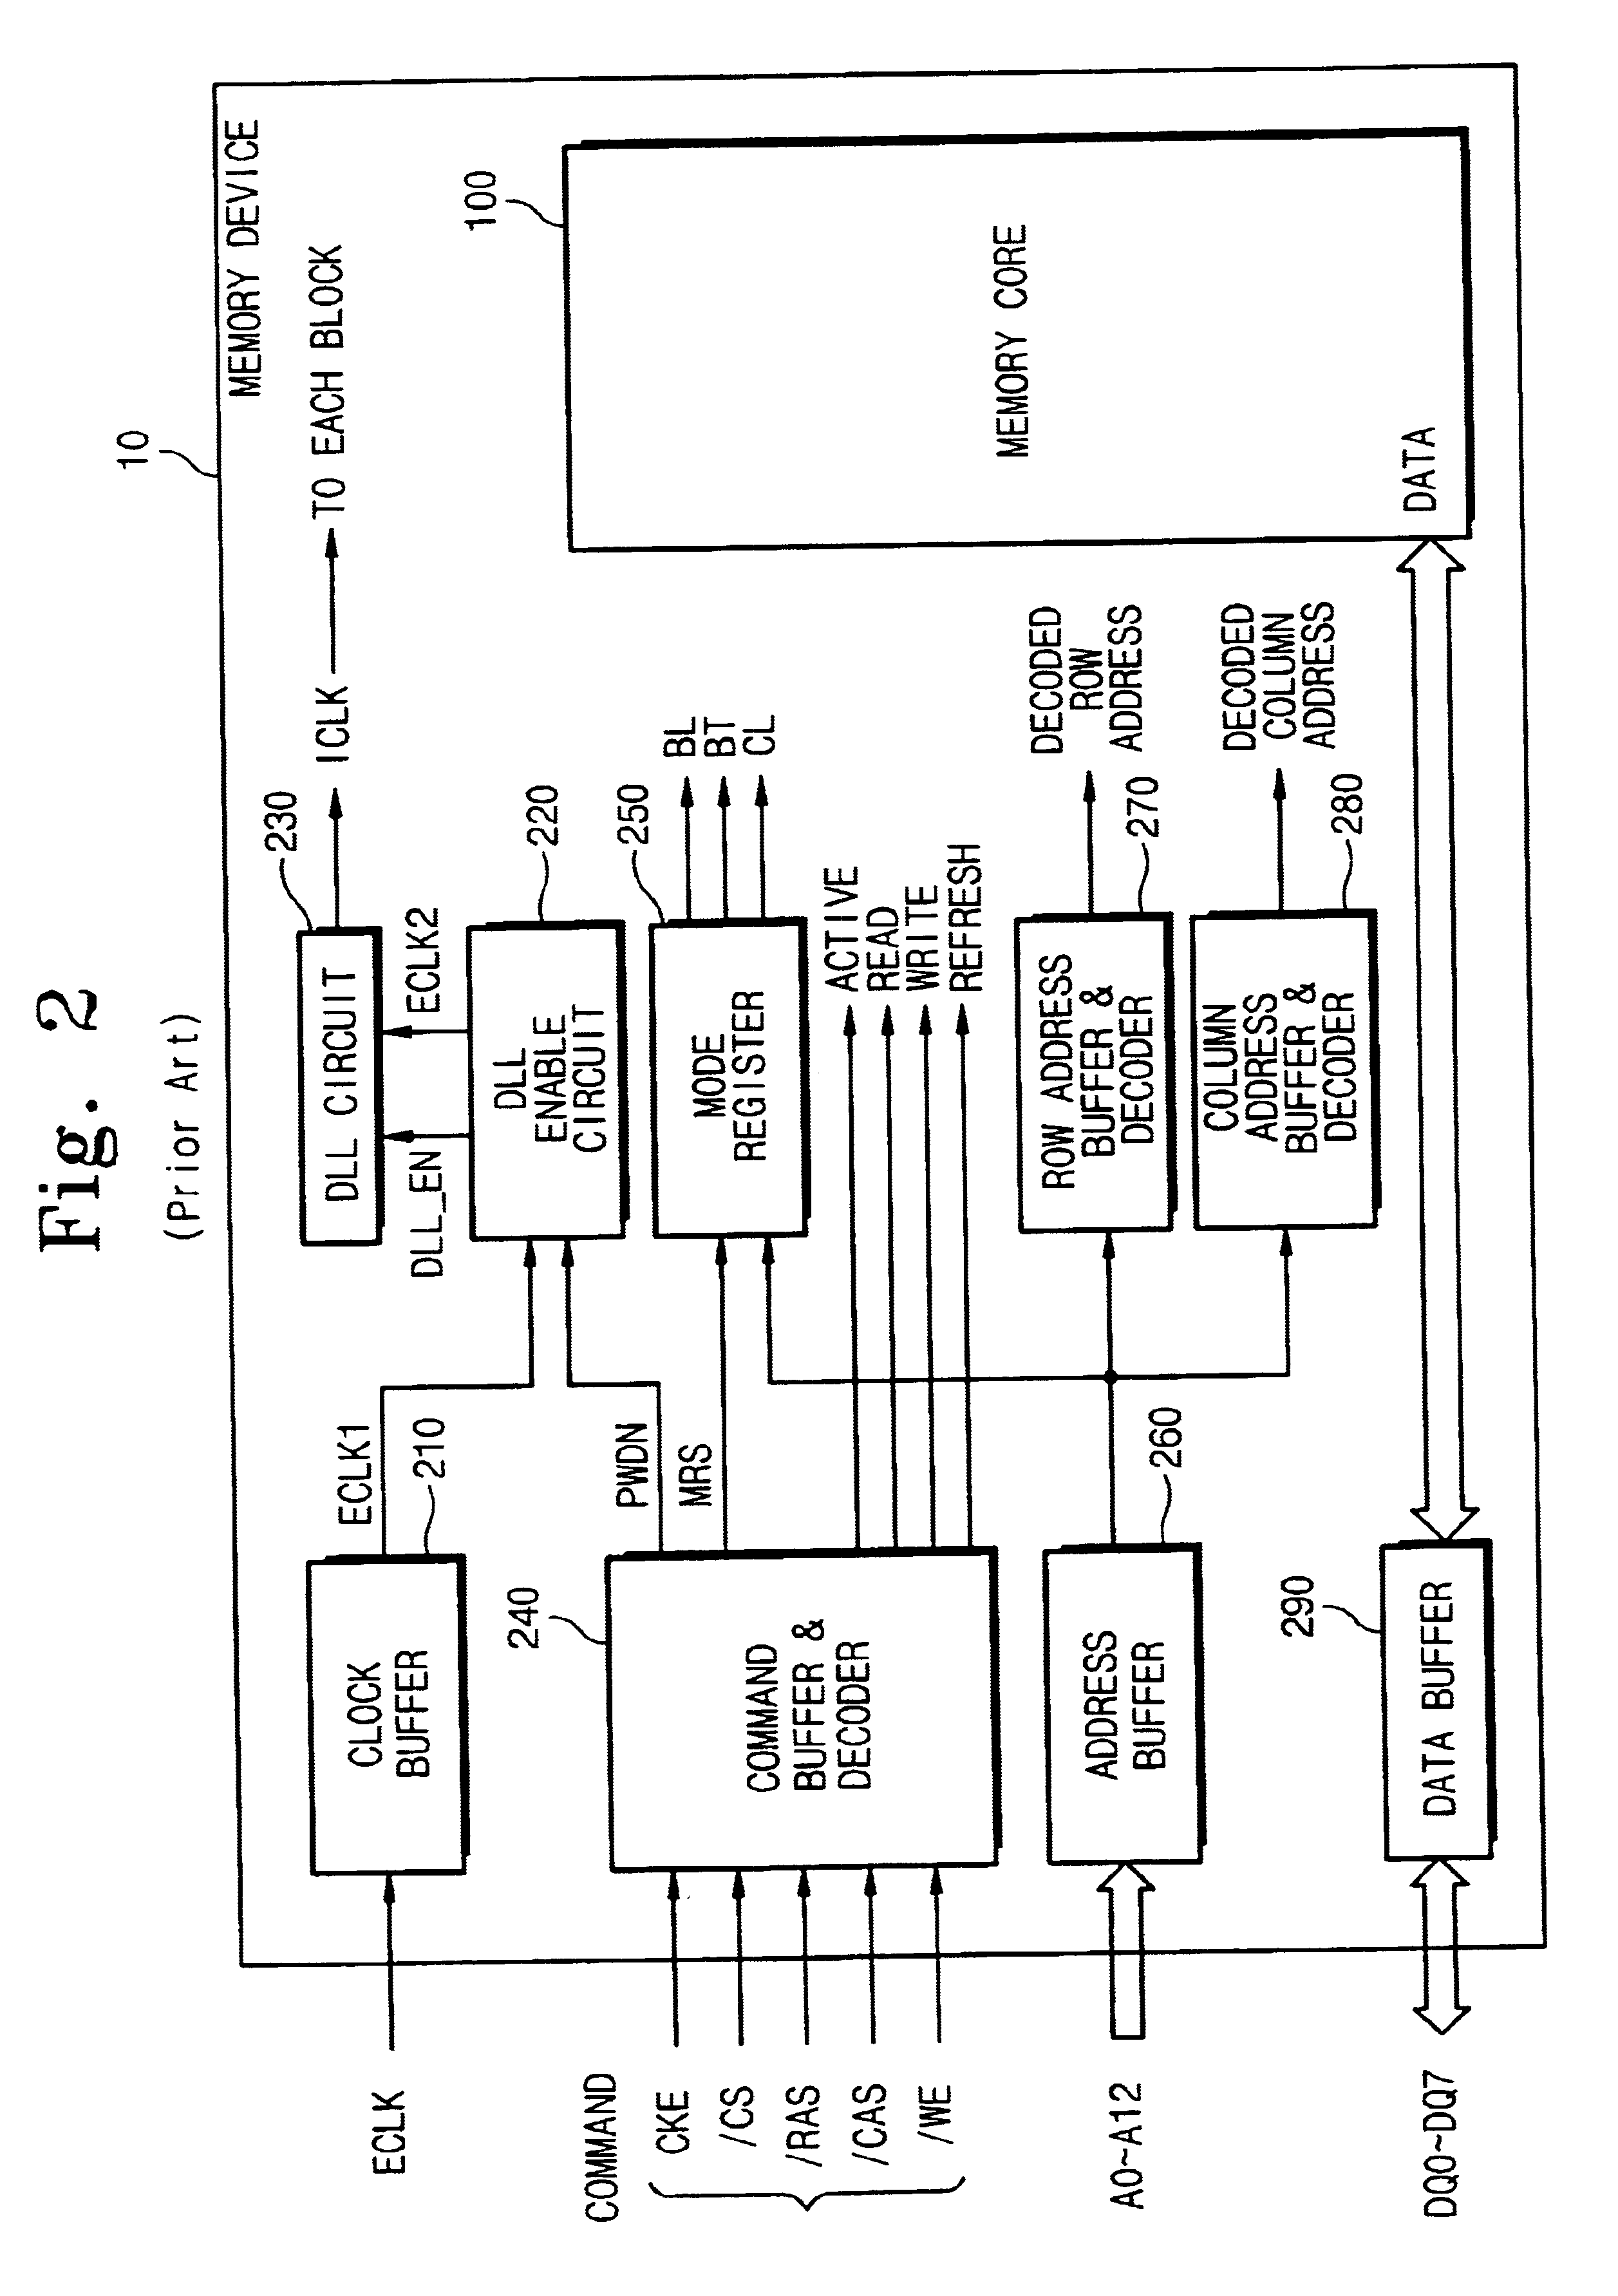 Device and method for selecting power down exit